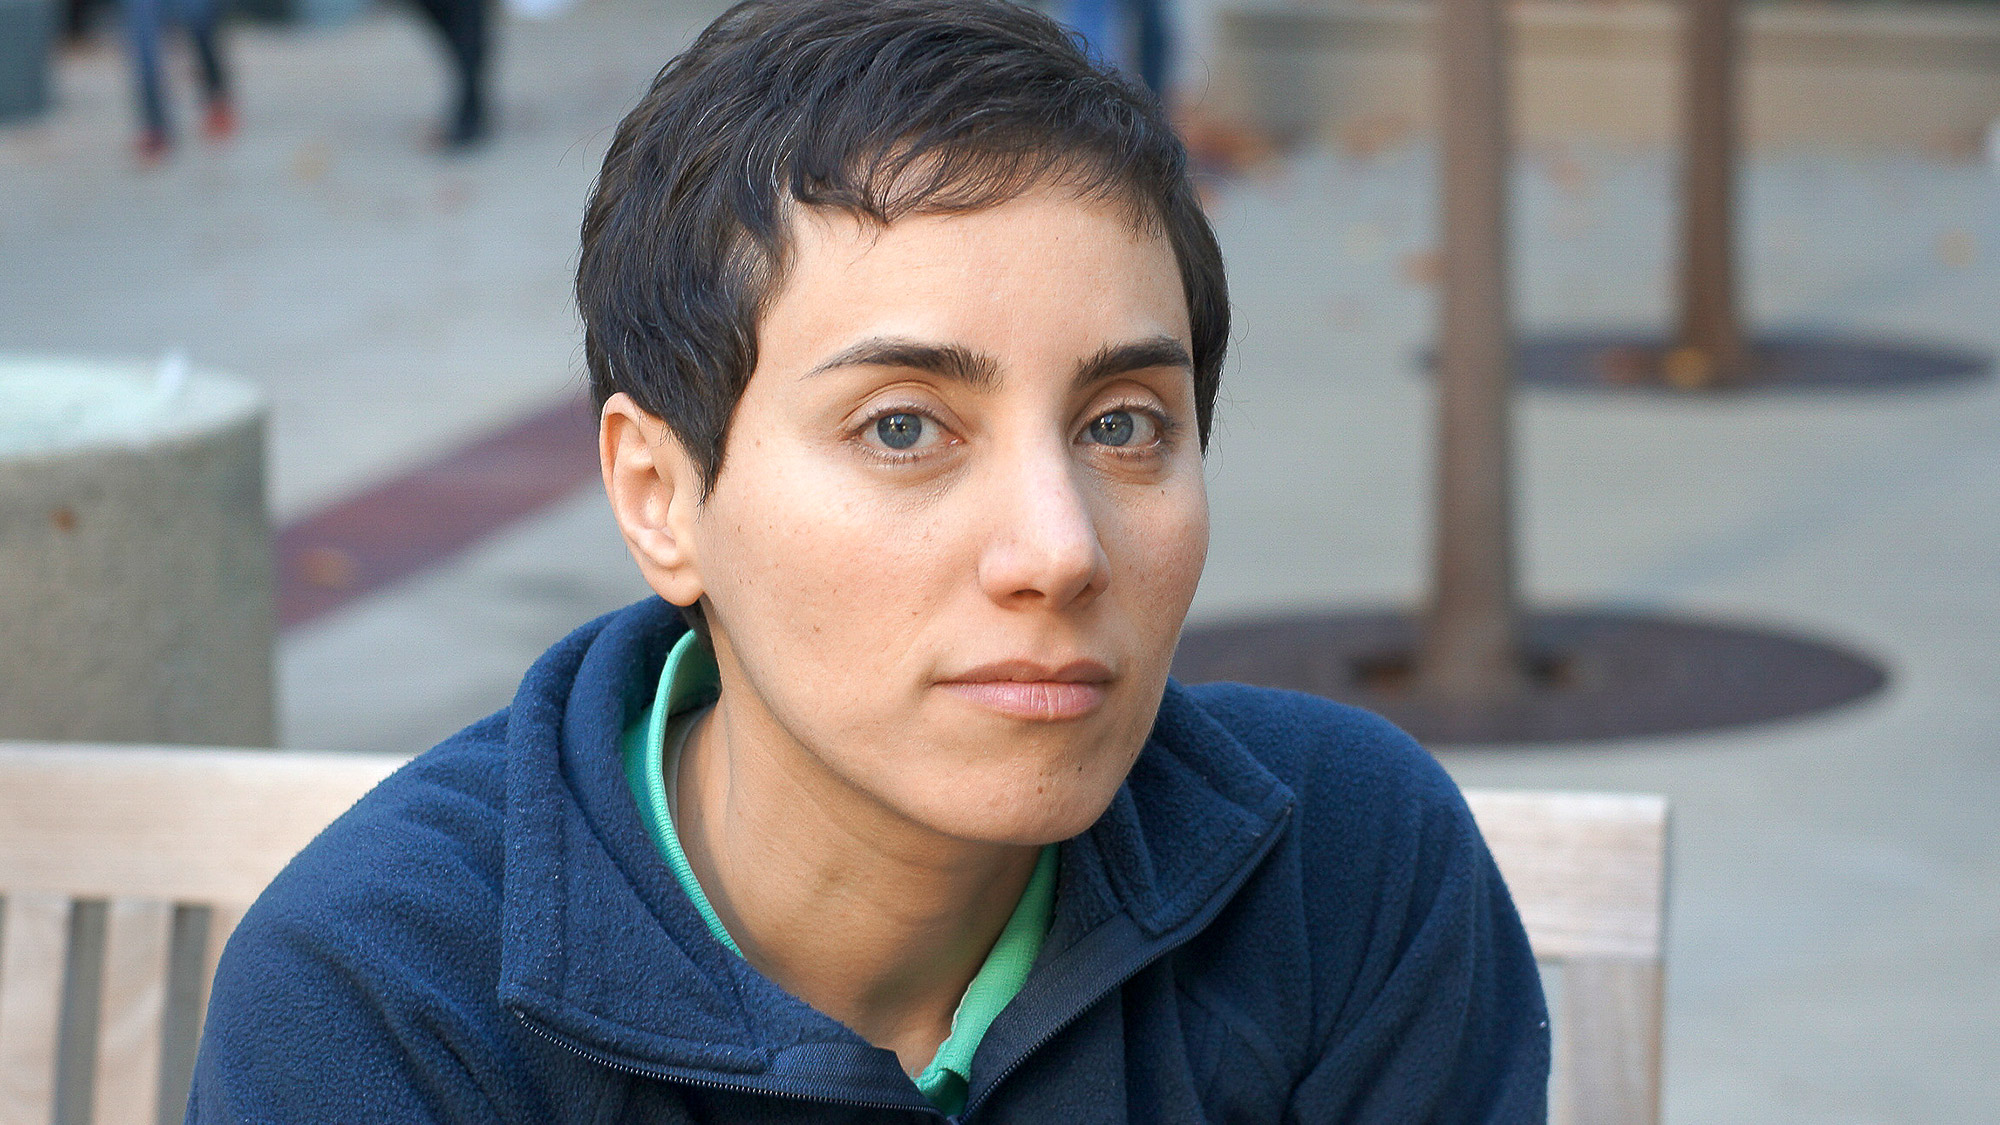 Maryam Mirzhakhani, the only woman to win the prestigious Fields Medal